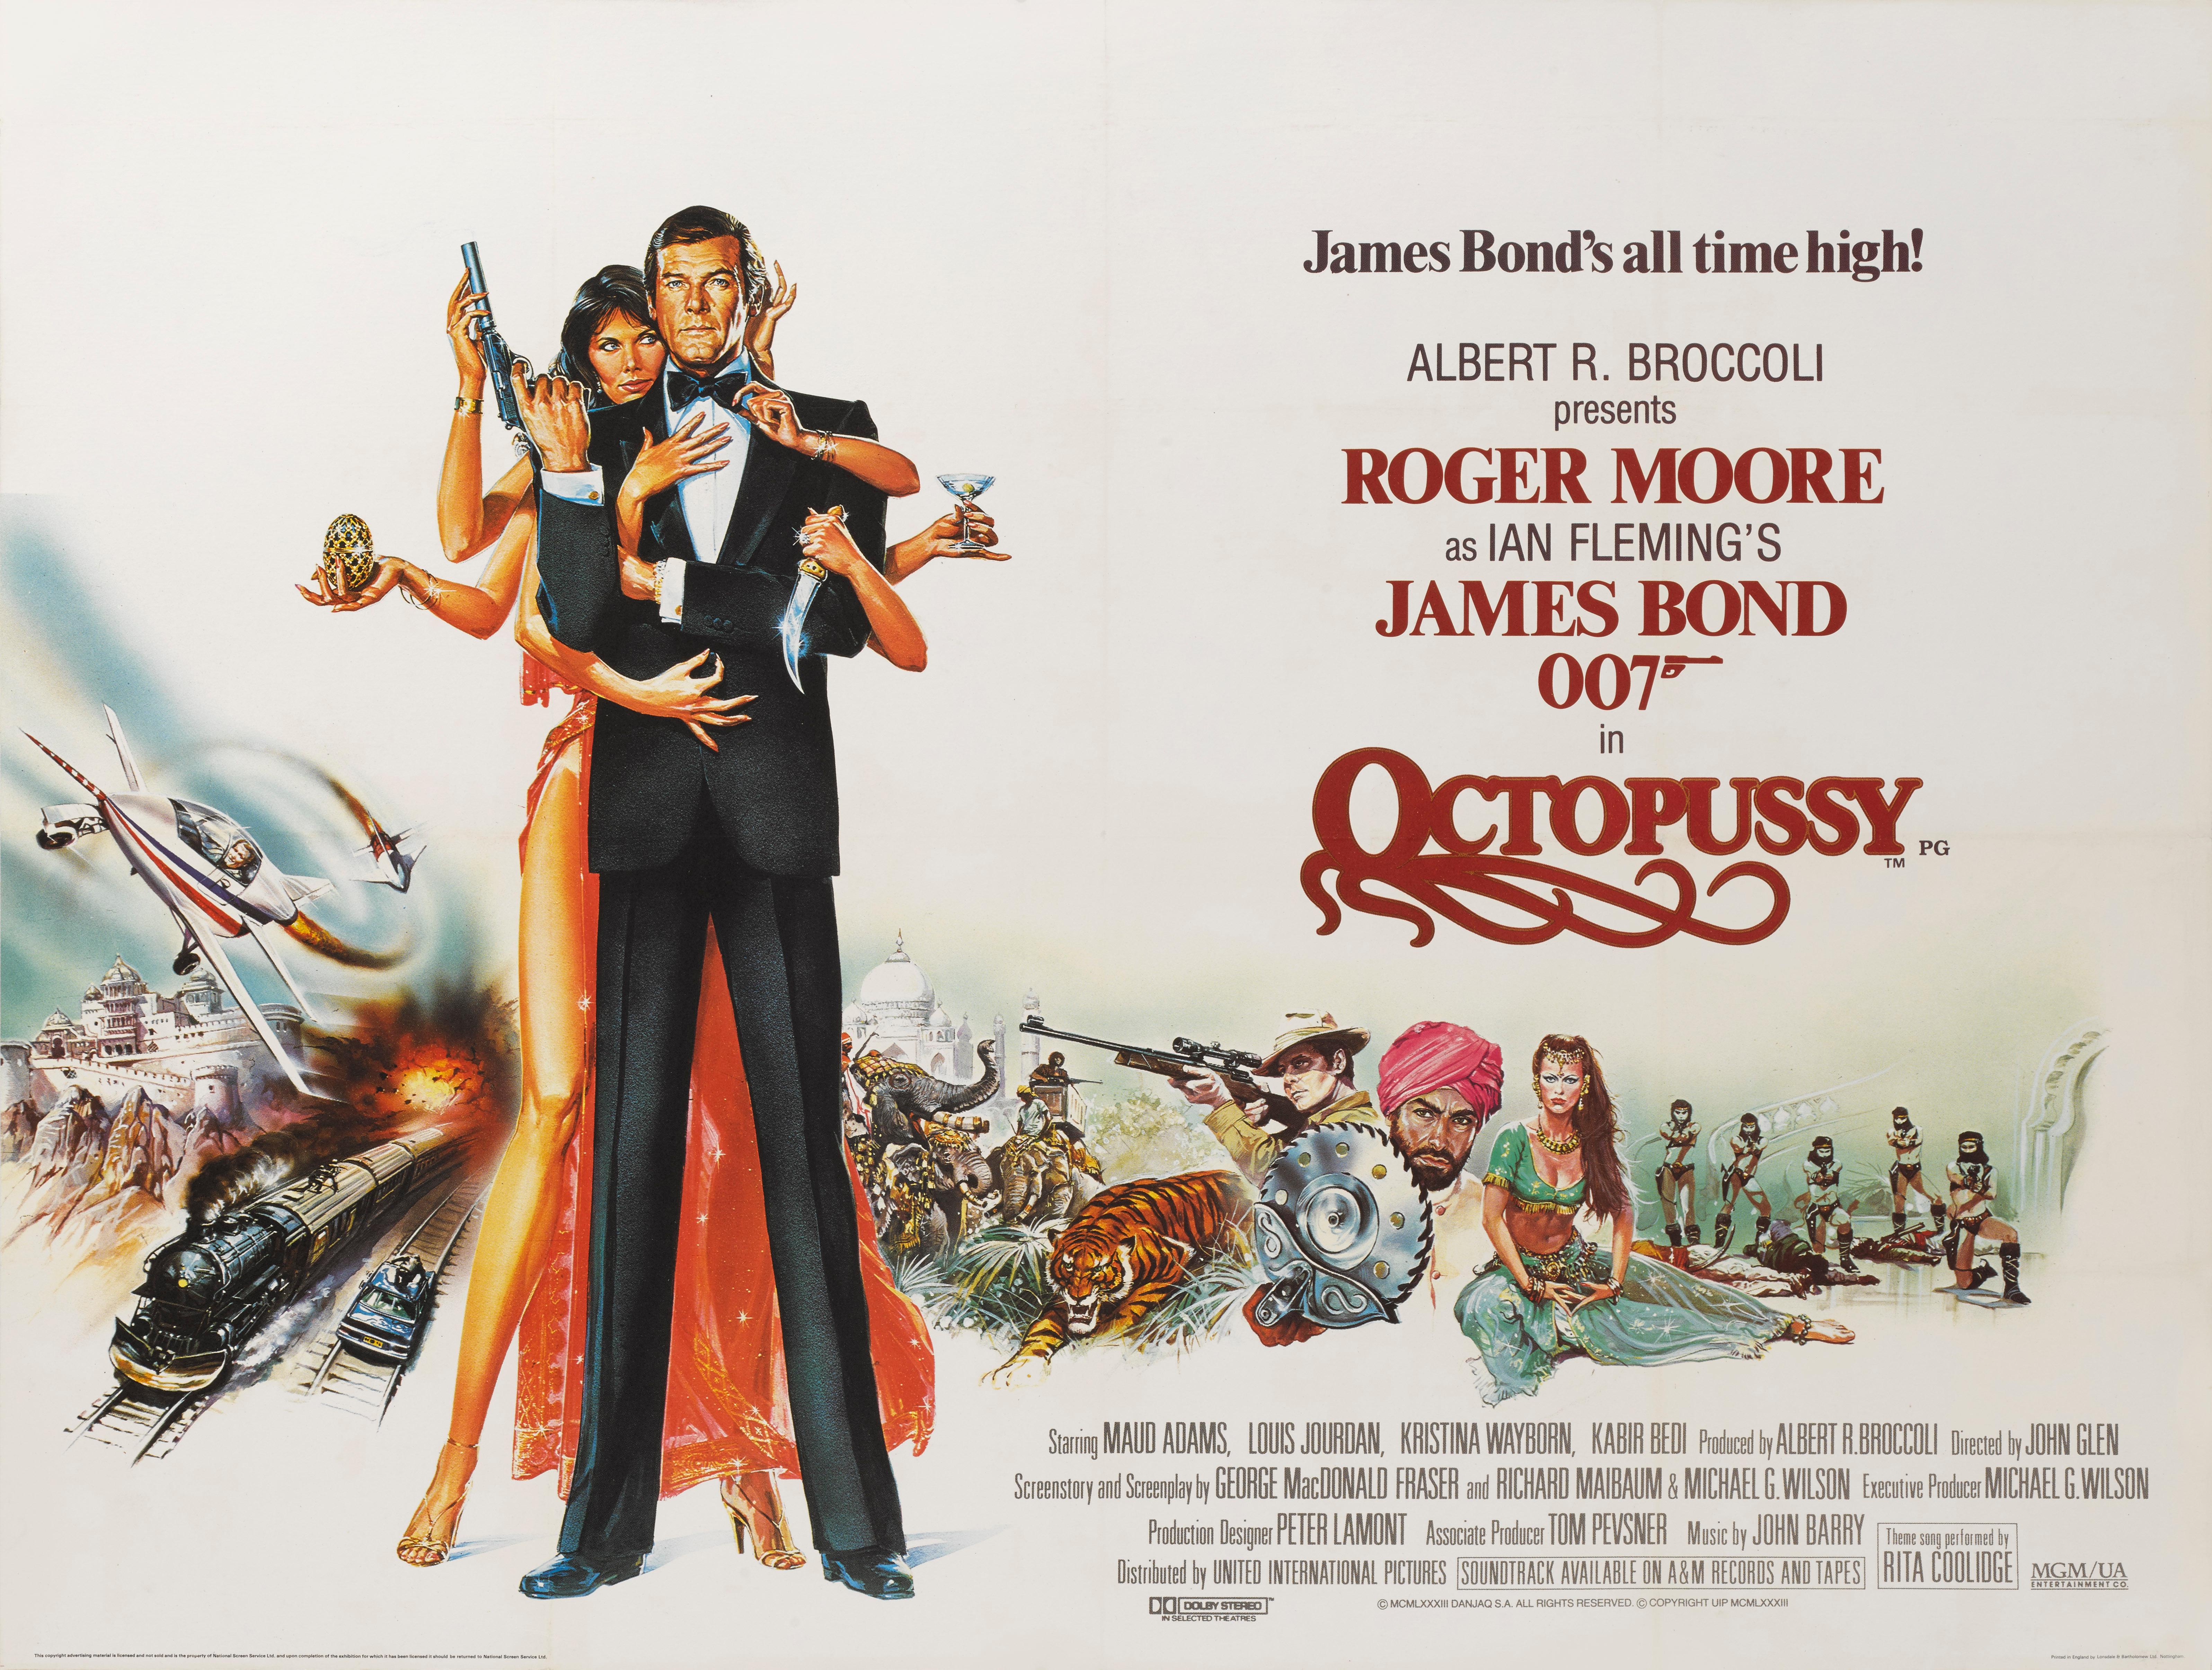 Original British movie poster for the (1983) James Bond film Octopussy.
This is the thirteenth film in the James Bond series produced by Eon Productions, and the sixth to star Roger Moore as James Bond. It was directed by John Glen, and also stars